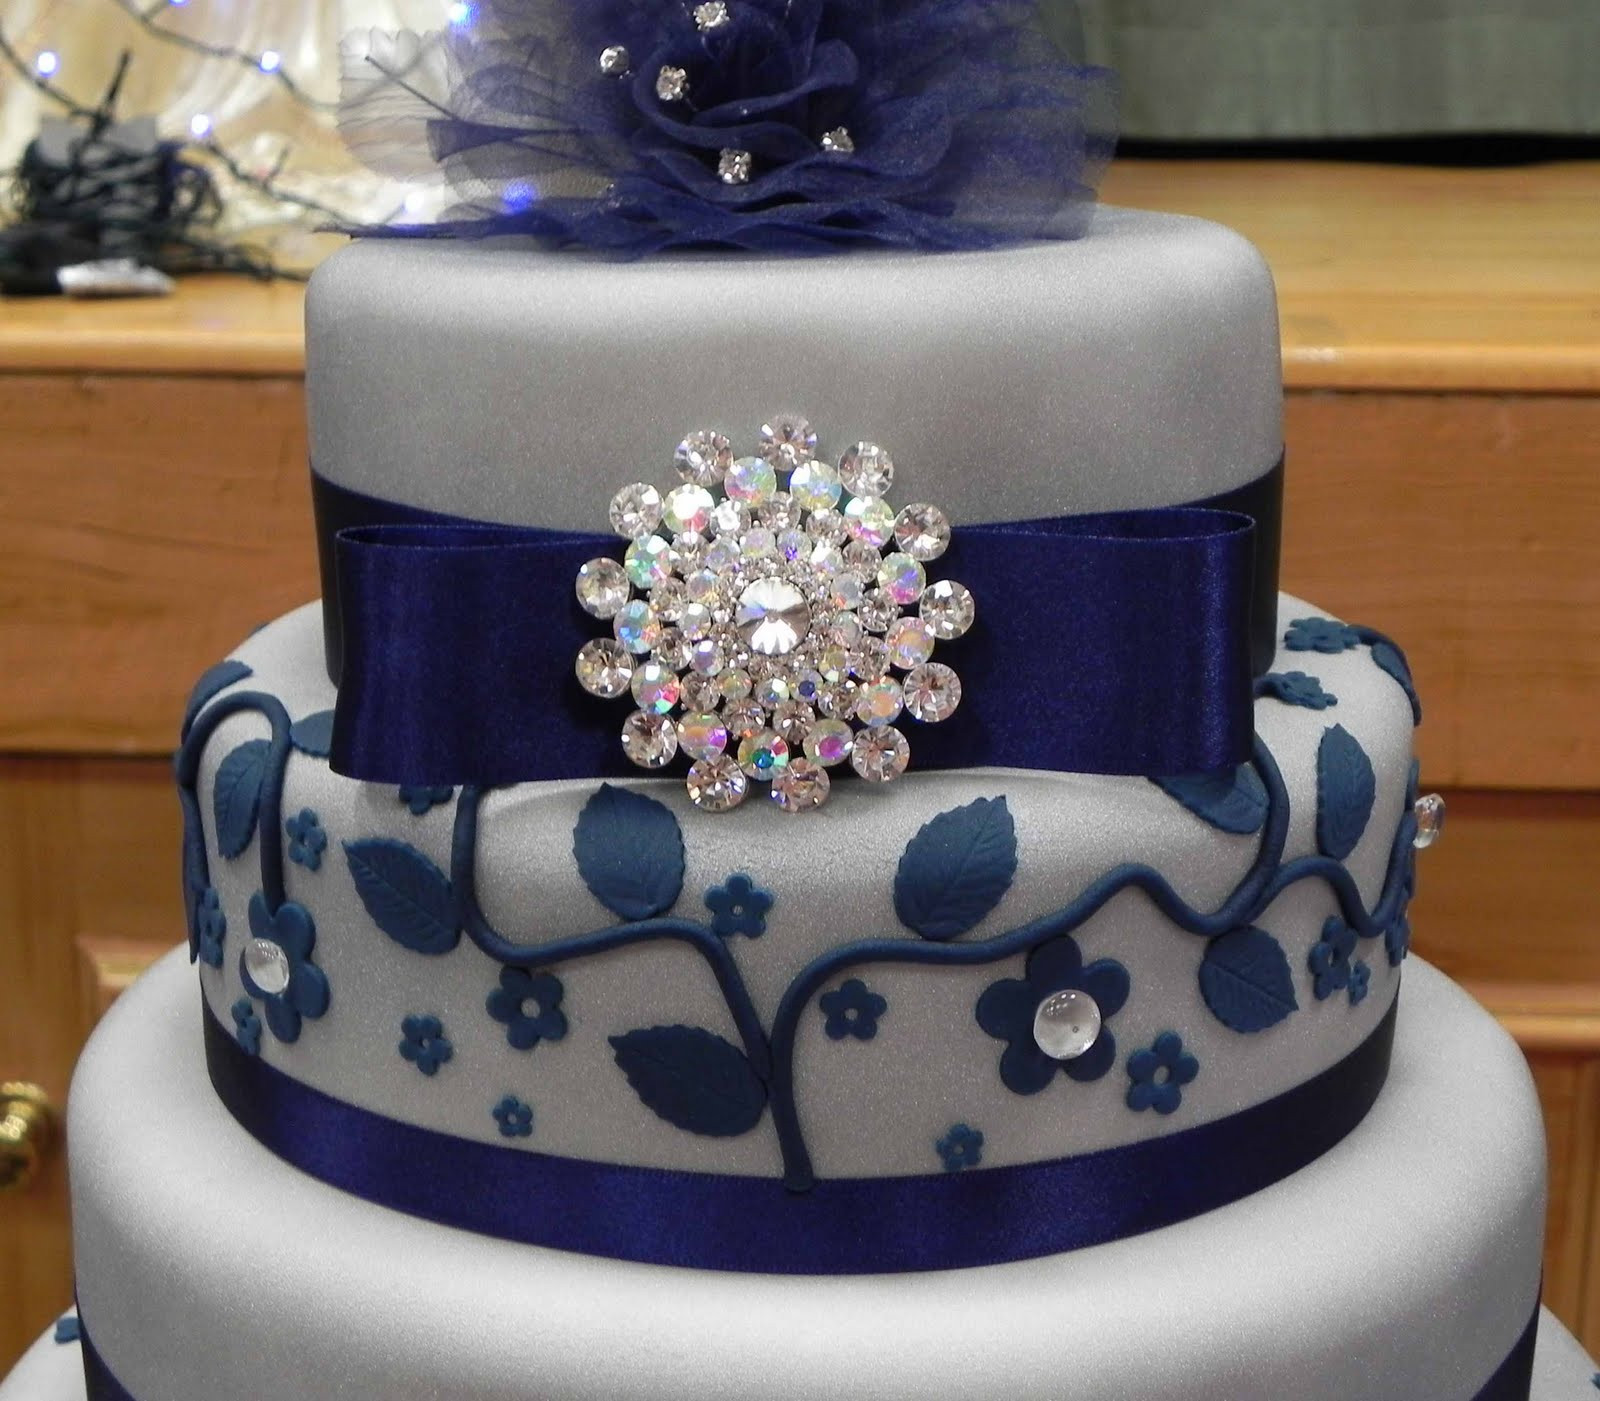 Royal Blue And Silver Wedding Cakes
 Cake by Lisa Price Silver and Blue wedding cake